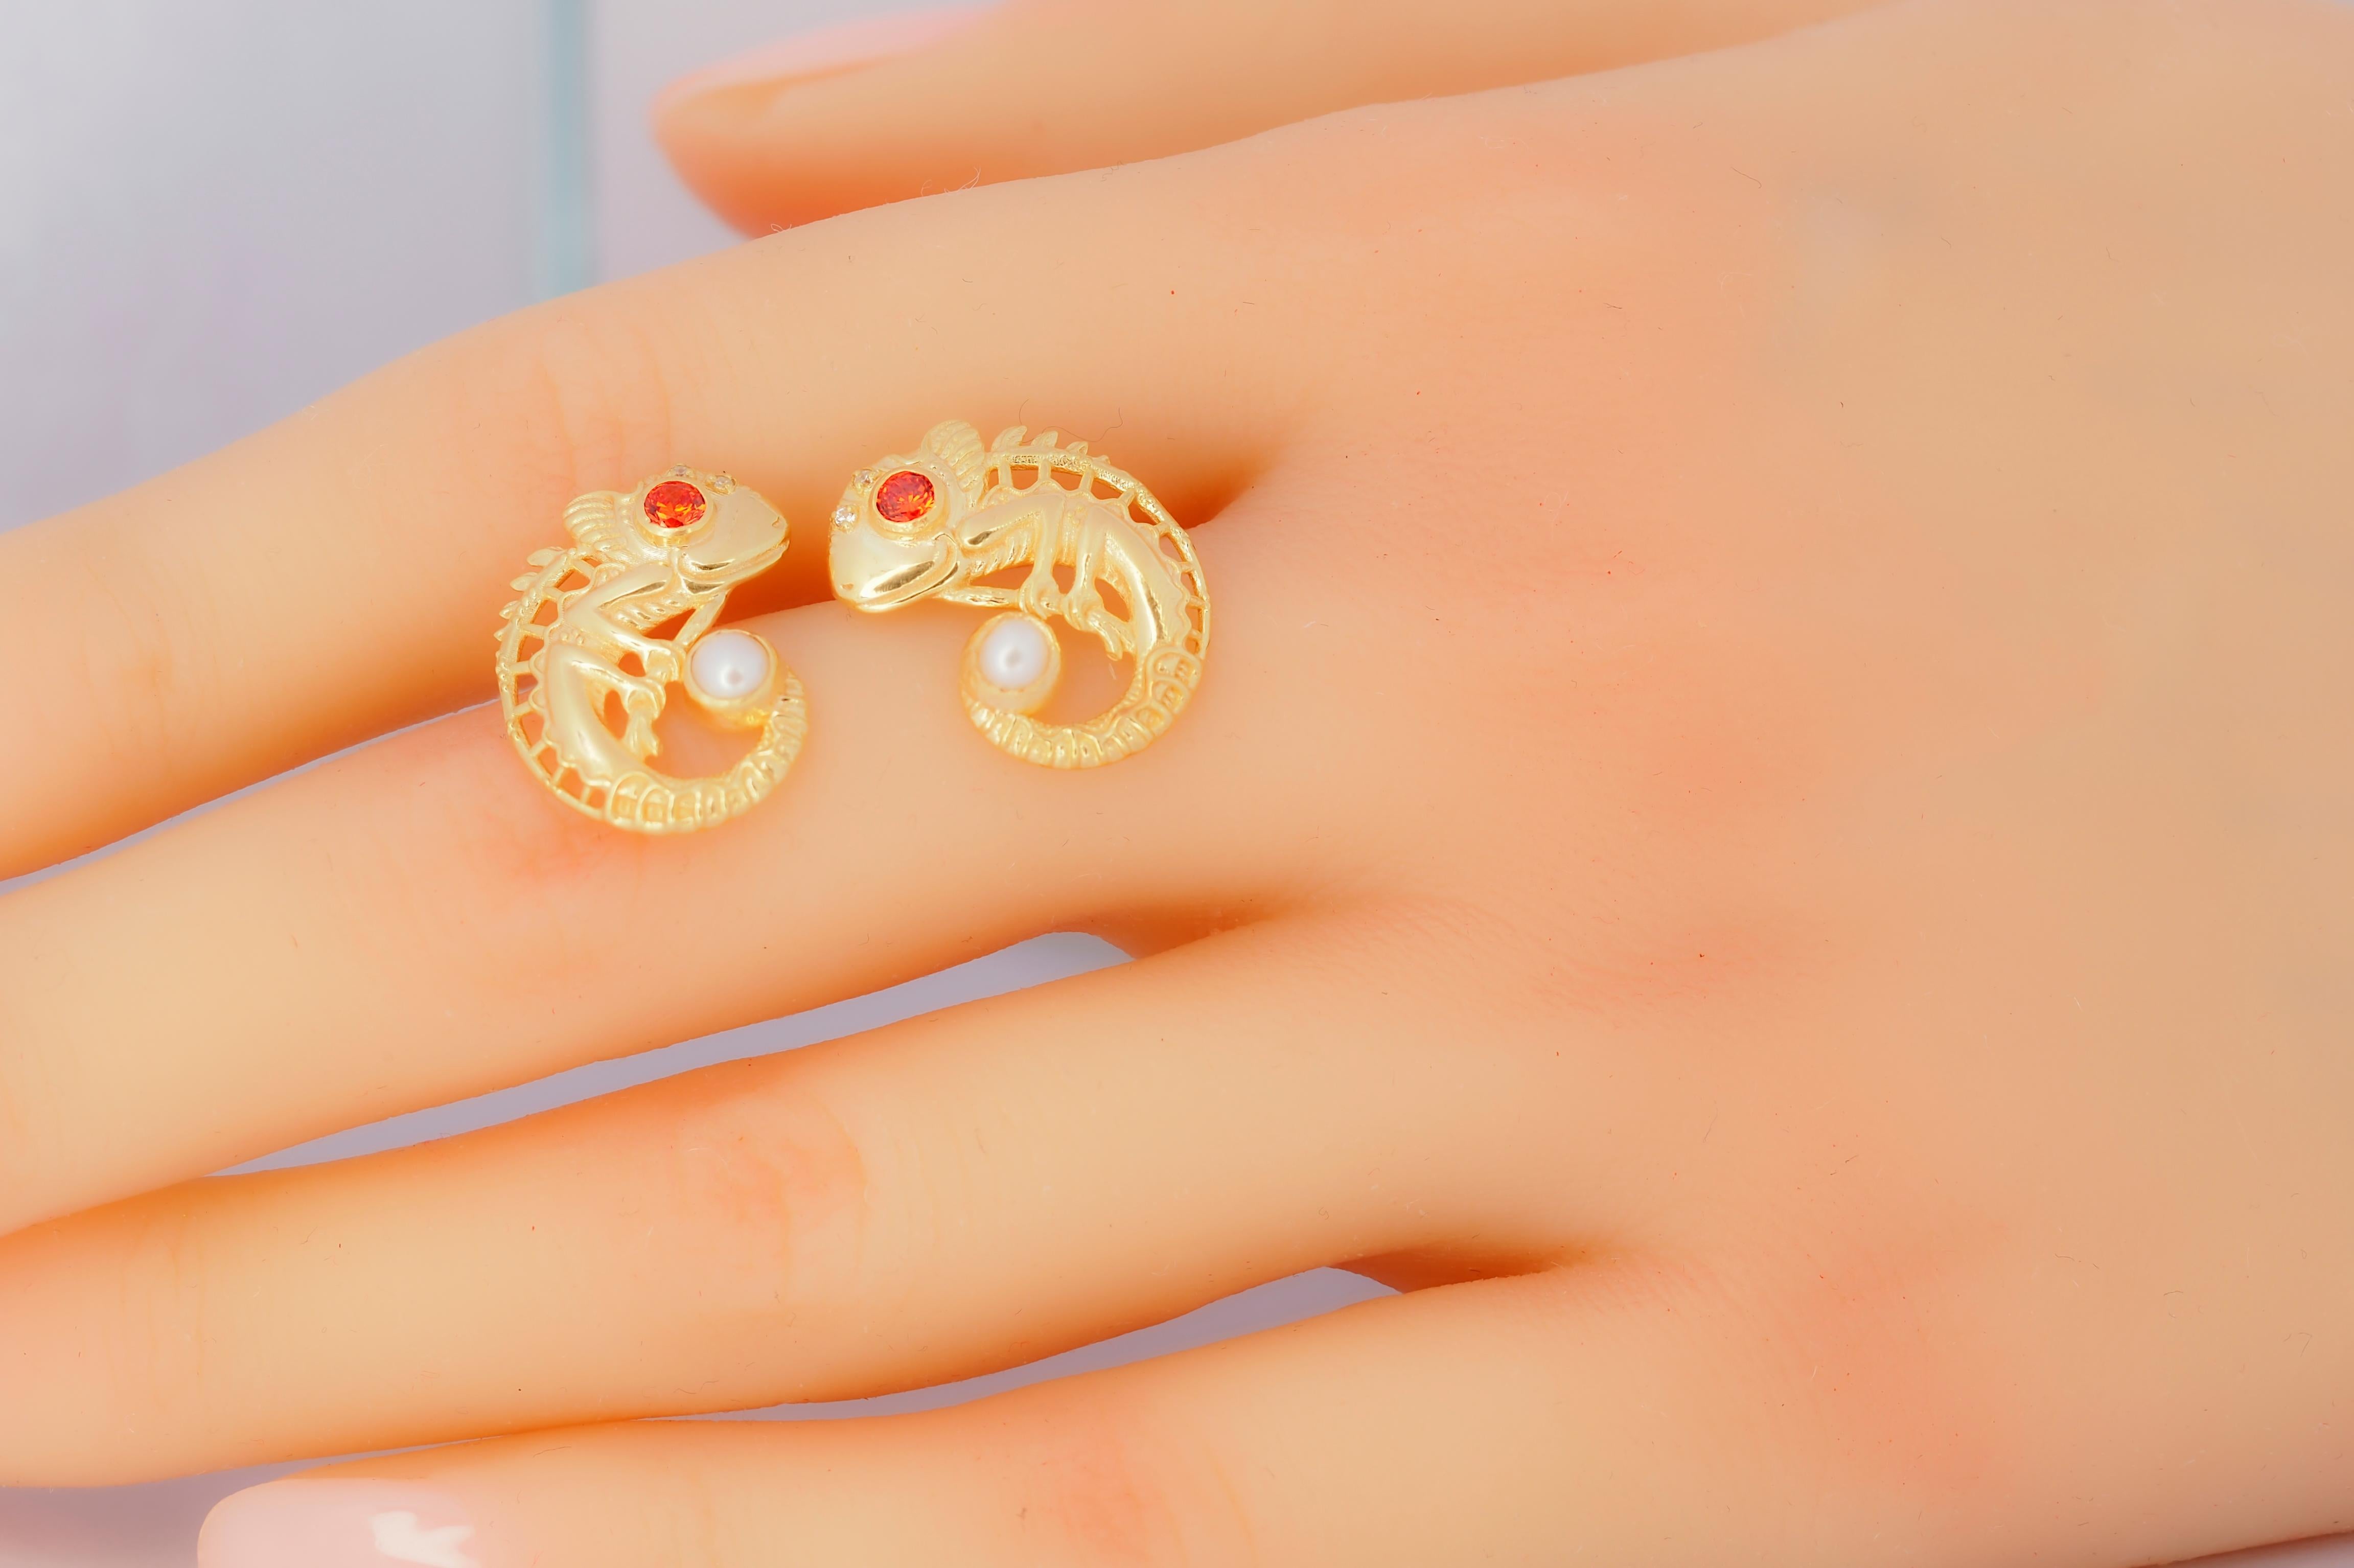 Chameleon earrings studs 14k Gold. Orange sapphire earrings. Reptile gold earrings. Gold Lizard earrings. Animal, Wildlife earrings.

Metal: 14k gold
8.5x16 mm size
Weight 3.5 gr

Gemstones:
Pearl: round button shape, white color 4 mm size
Sapphire: